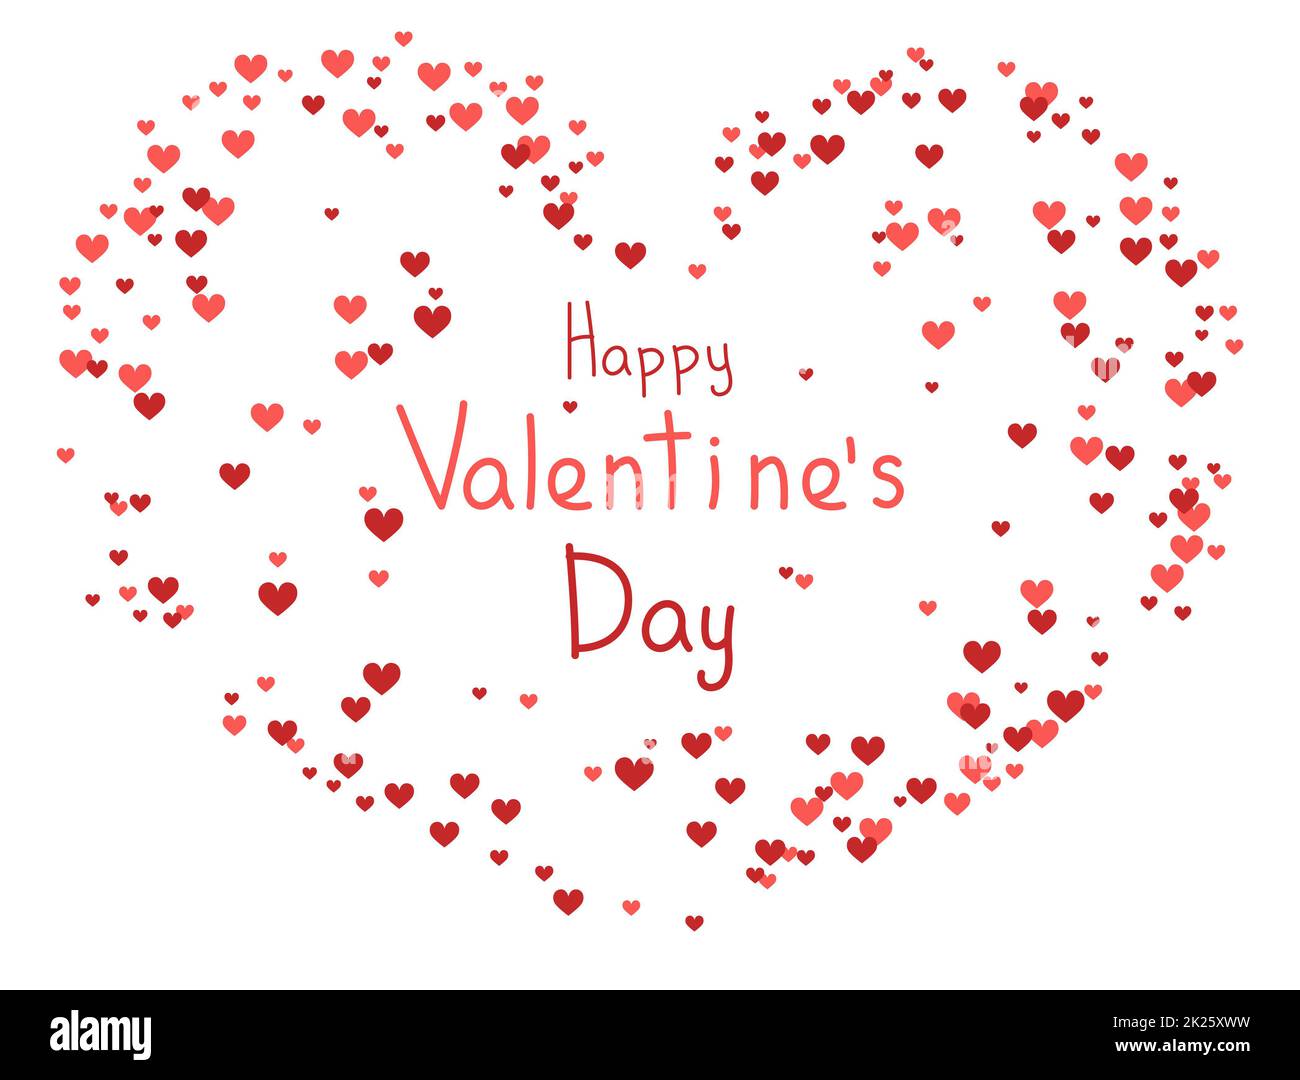 Flying heart confetti, valentines day vector background By Microvector